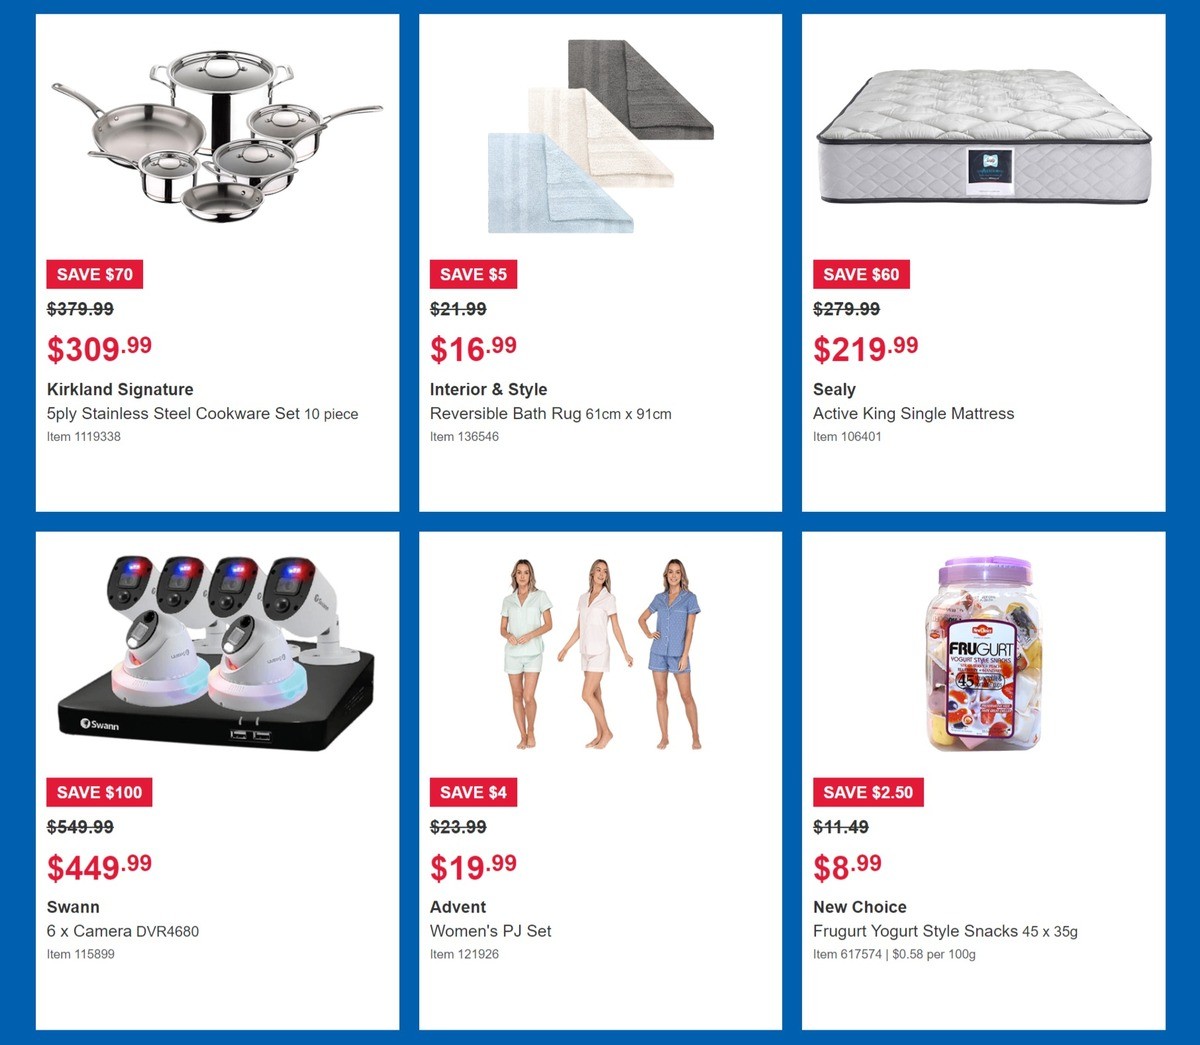 Costco Catalogues from 2 January